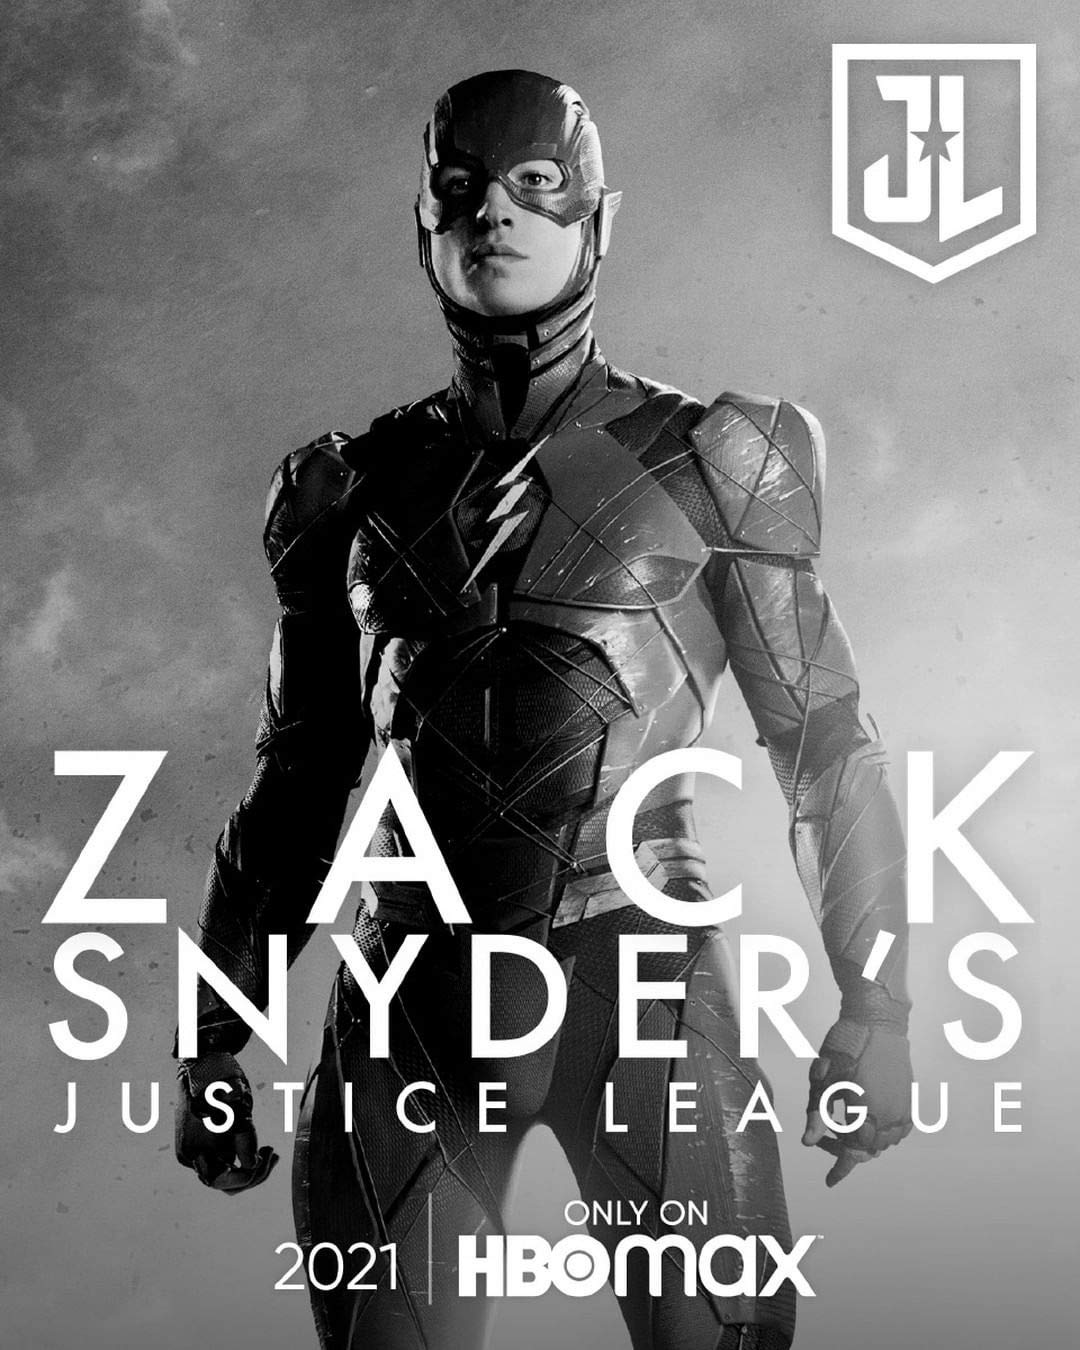 Official Snyder's Justice League (Ezra Miller as The Flash) 2020 Poster (11x13.5): Posters & Prints